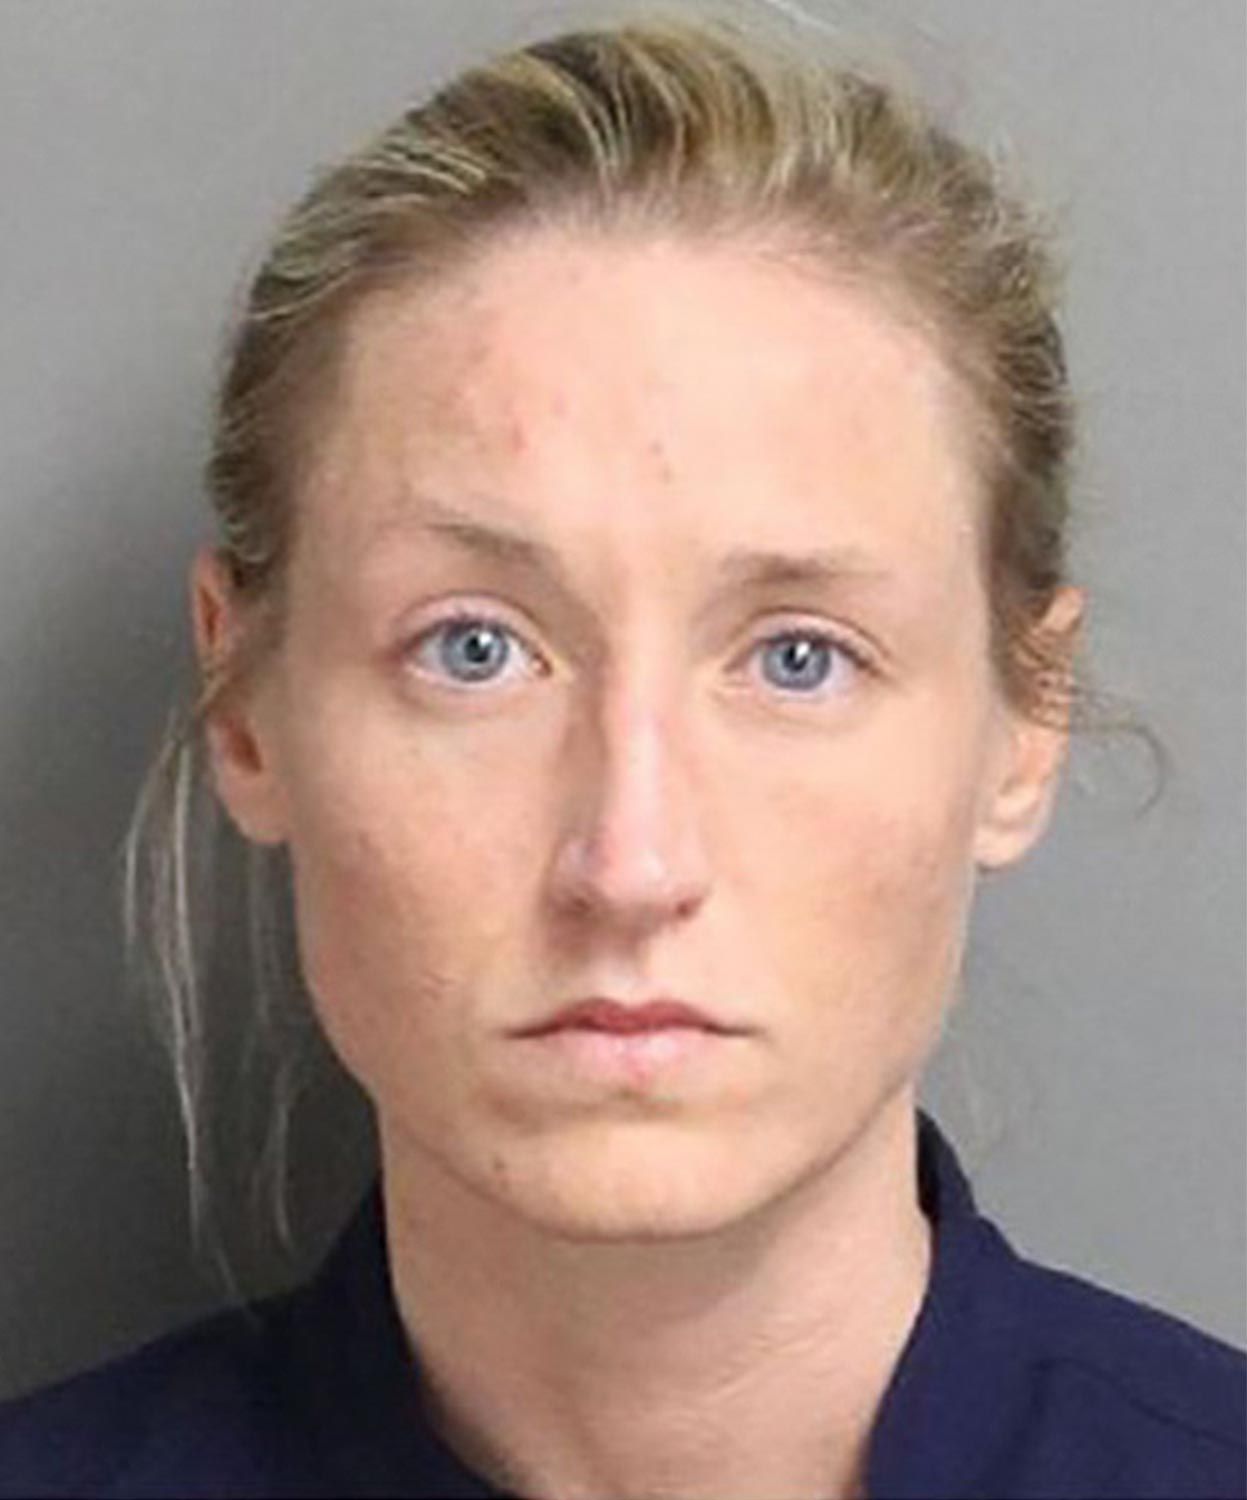 Former Youth Softball Coach Charged with Sodomy, Sexual Abuse Involving Player on Her Team Image?url=https%3A%2F%2Fstatic.onecms.io%2Fwp-content%2Fuploads%2Fsites%2F20%2F2022%2F02%2F25%2FMeagan-Billingsley-Deese